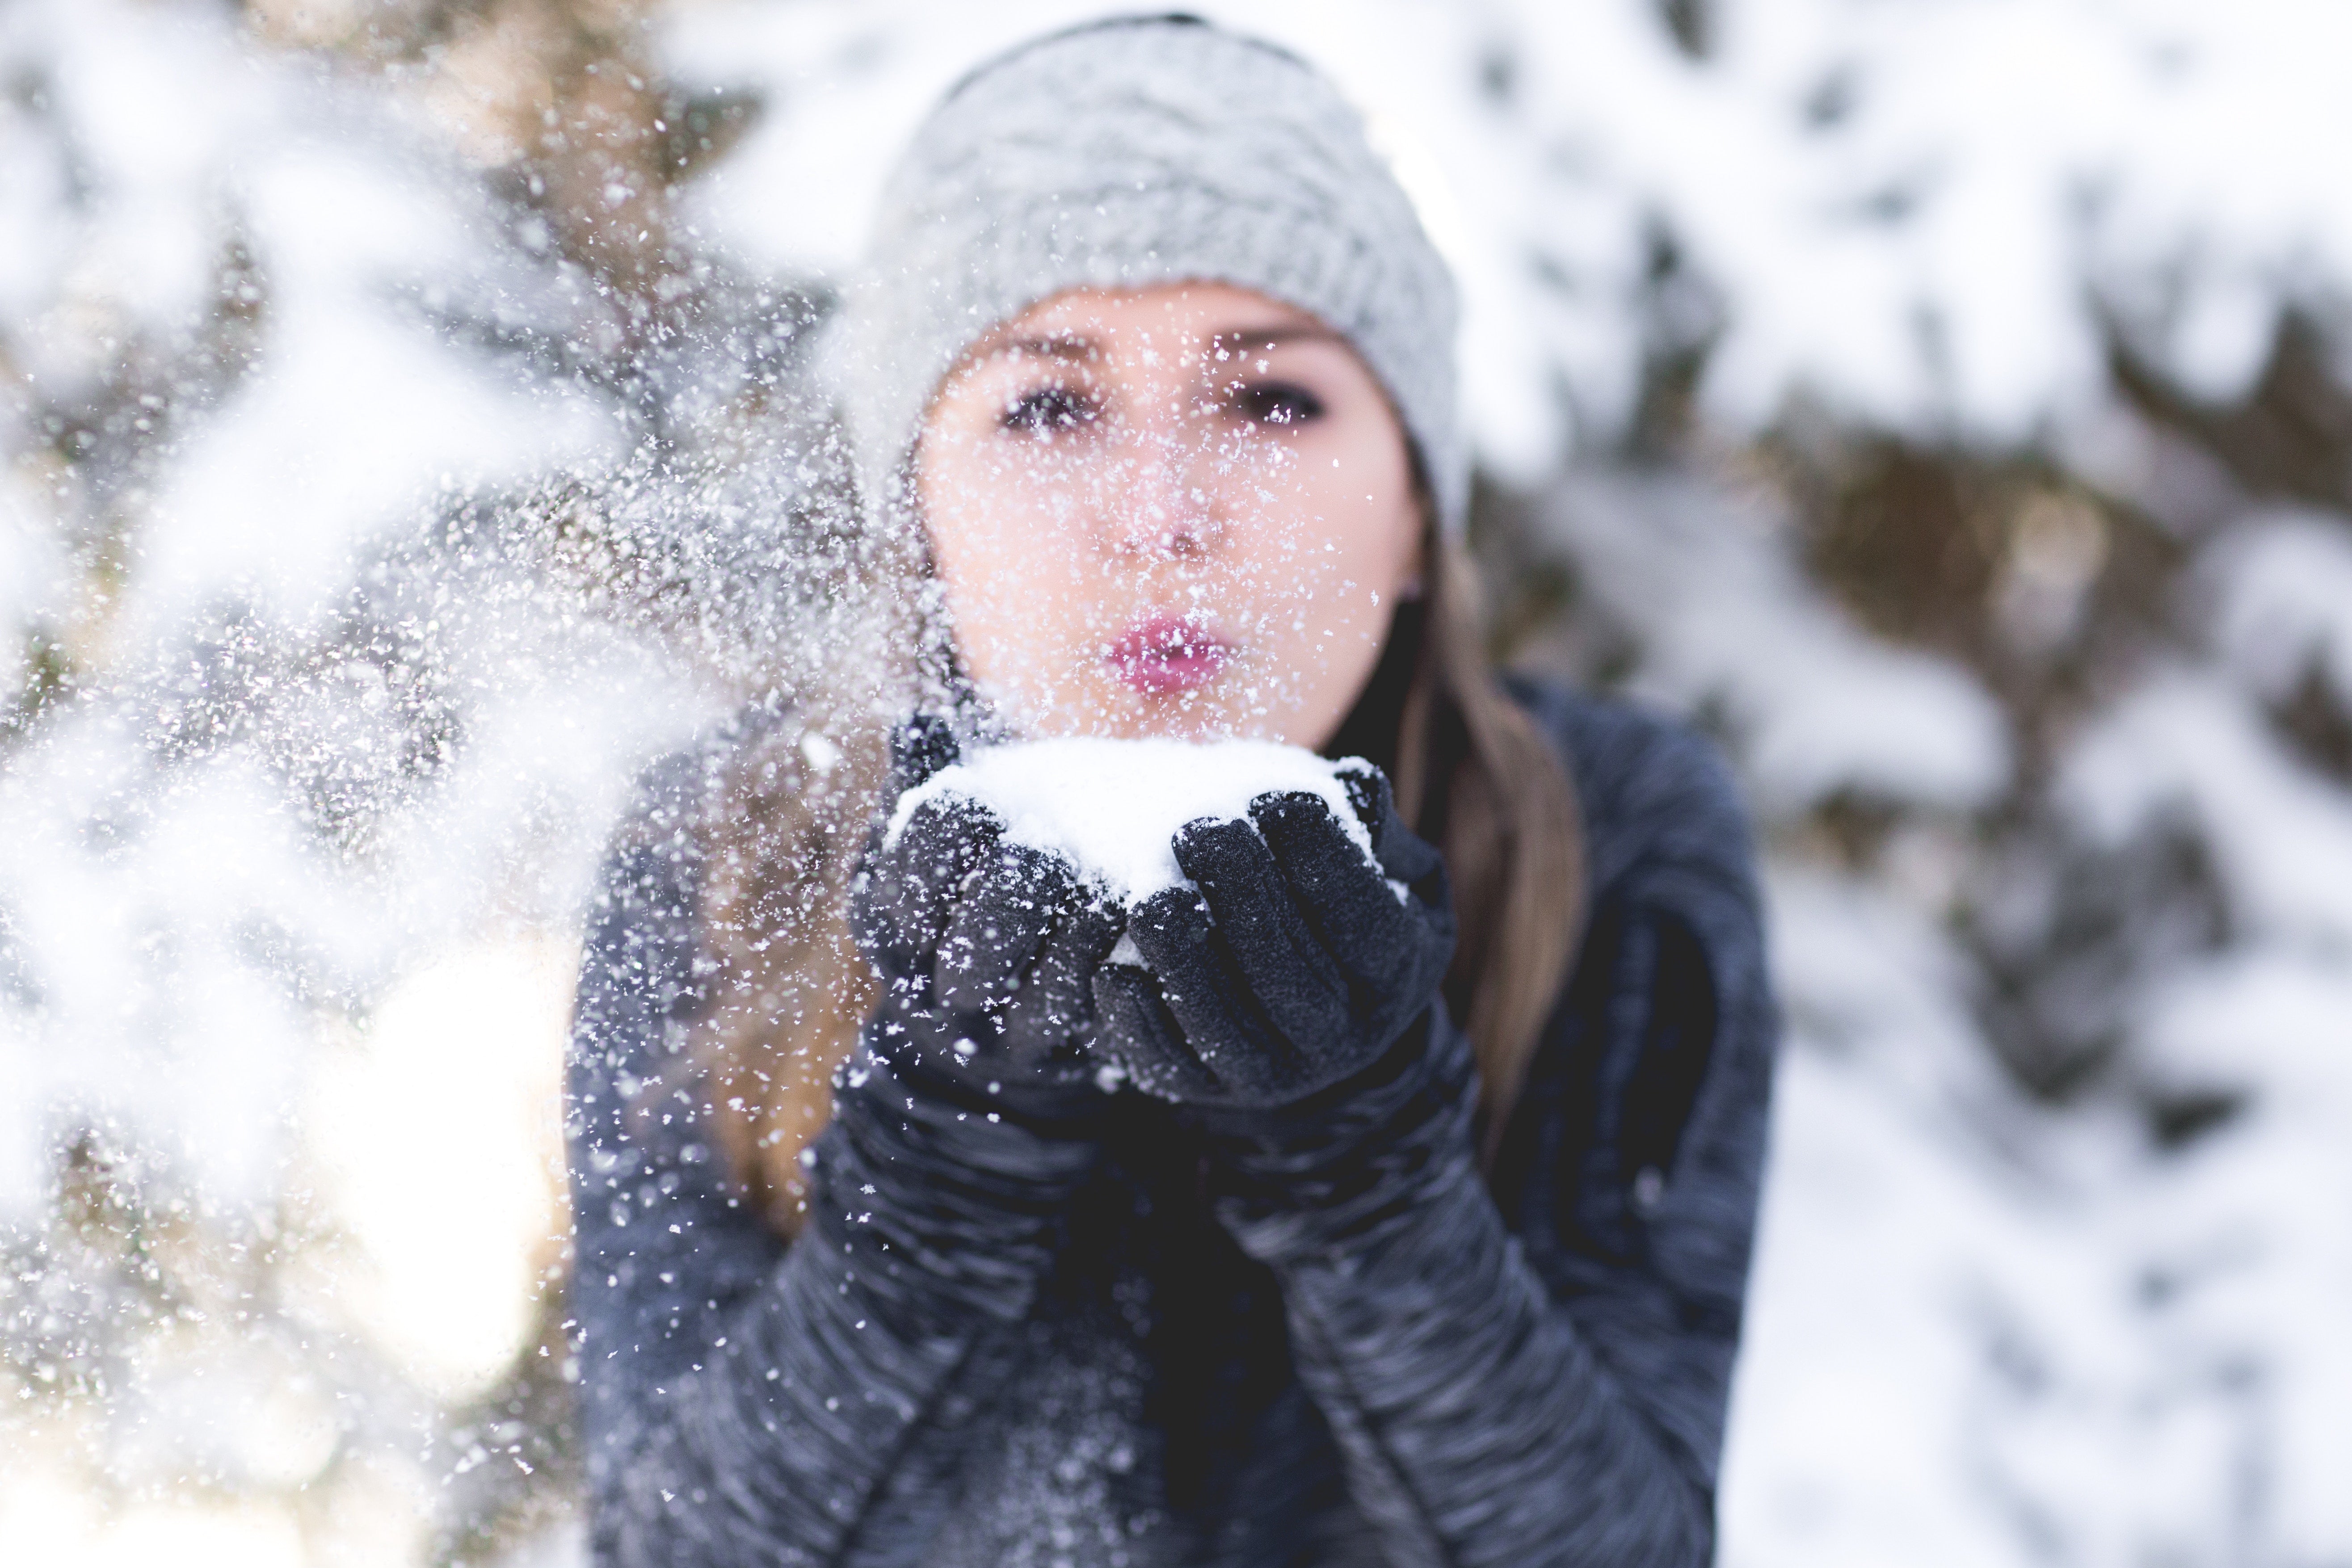 Brush On Block image of girl blowing handful of snow at camera